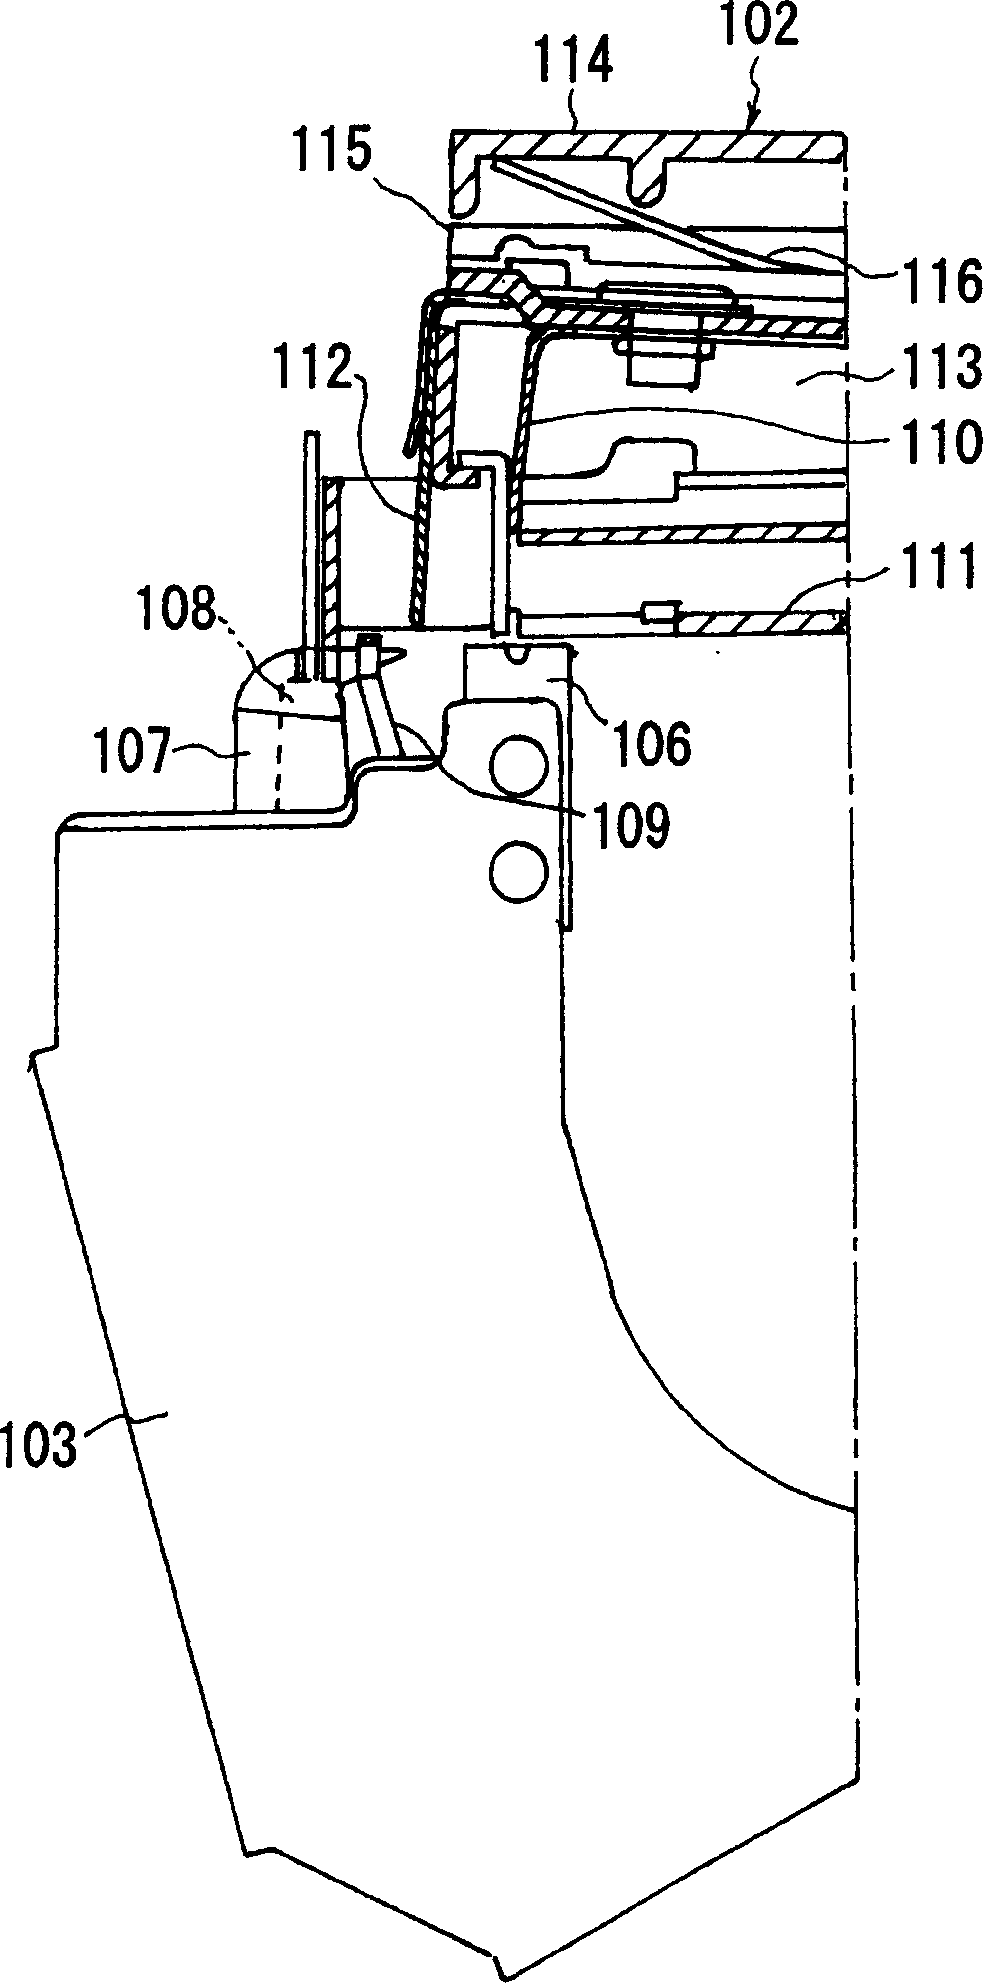 Tape guide device for gardening buncher